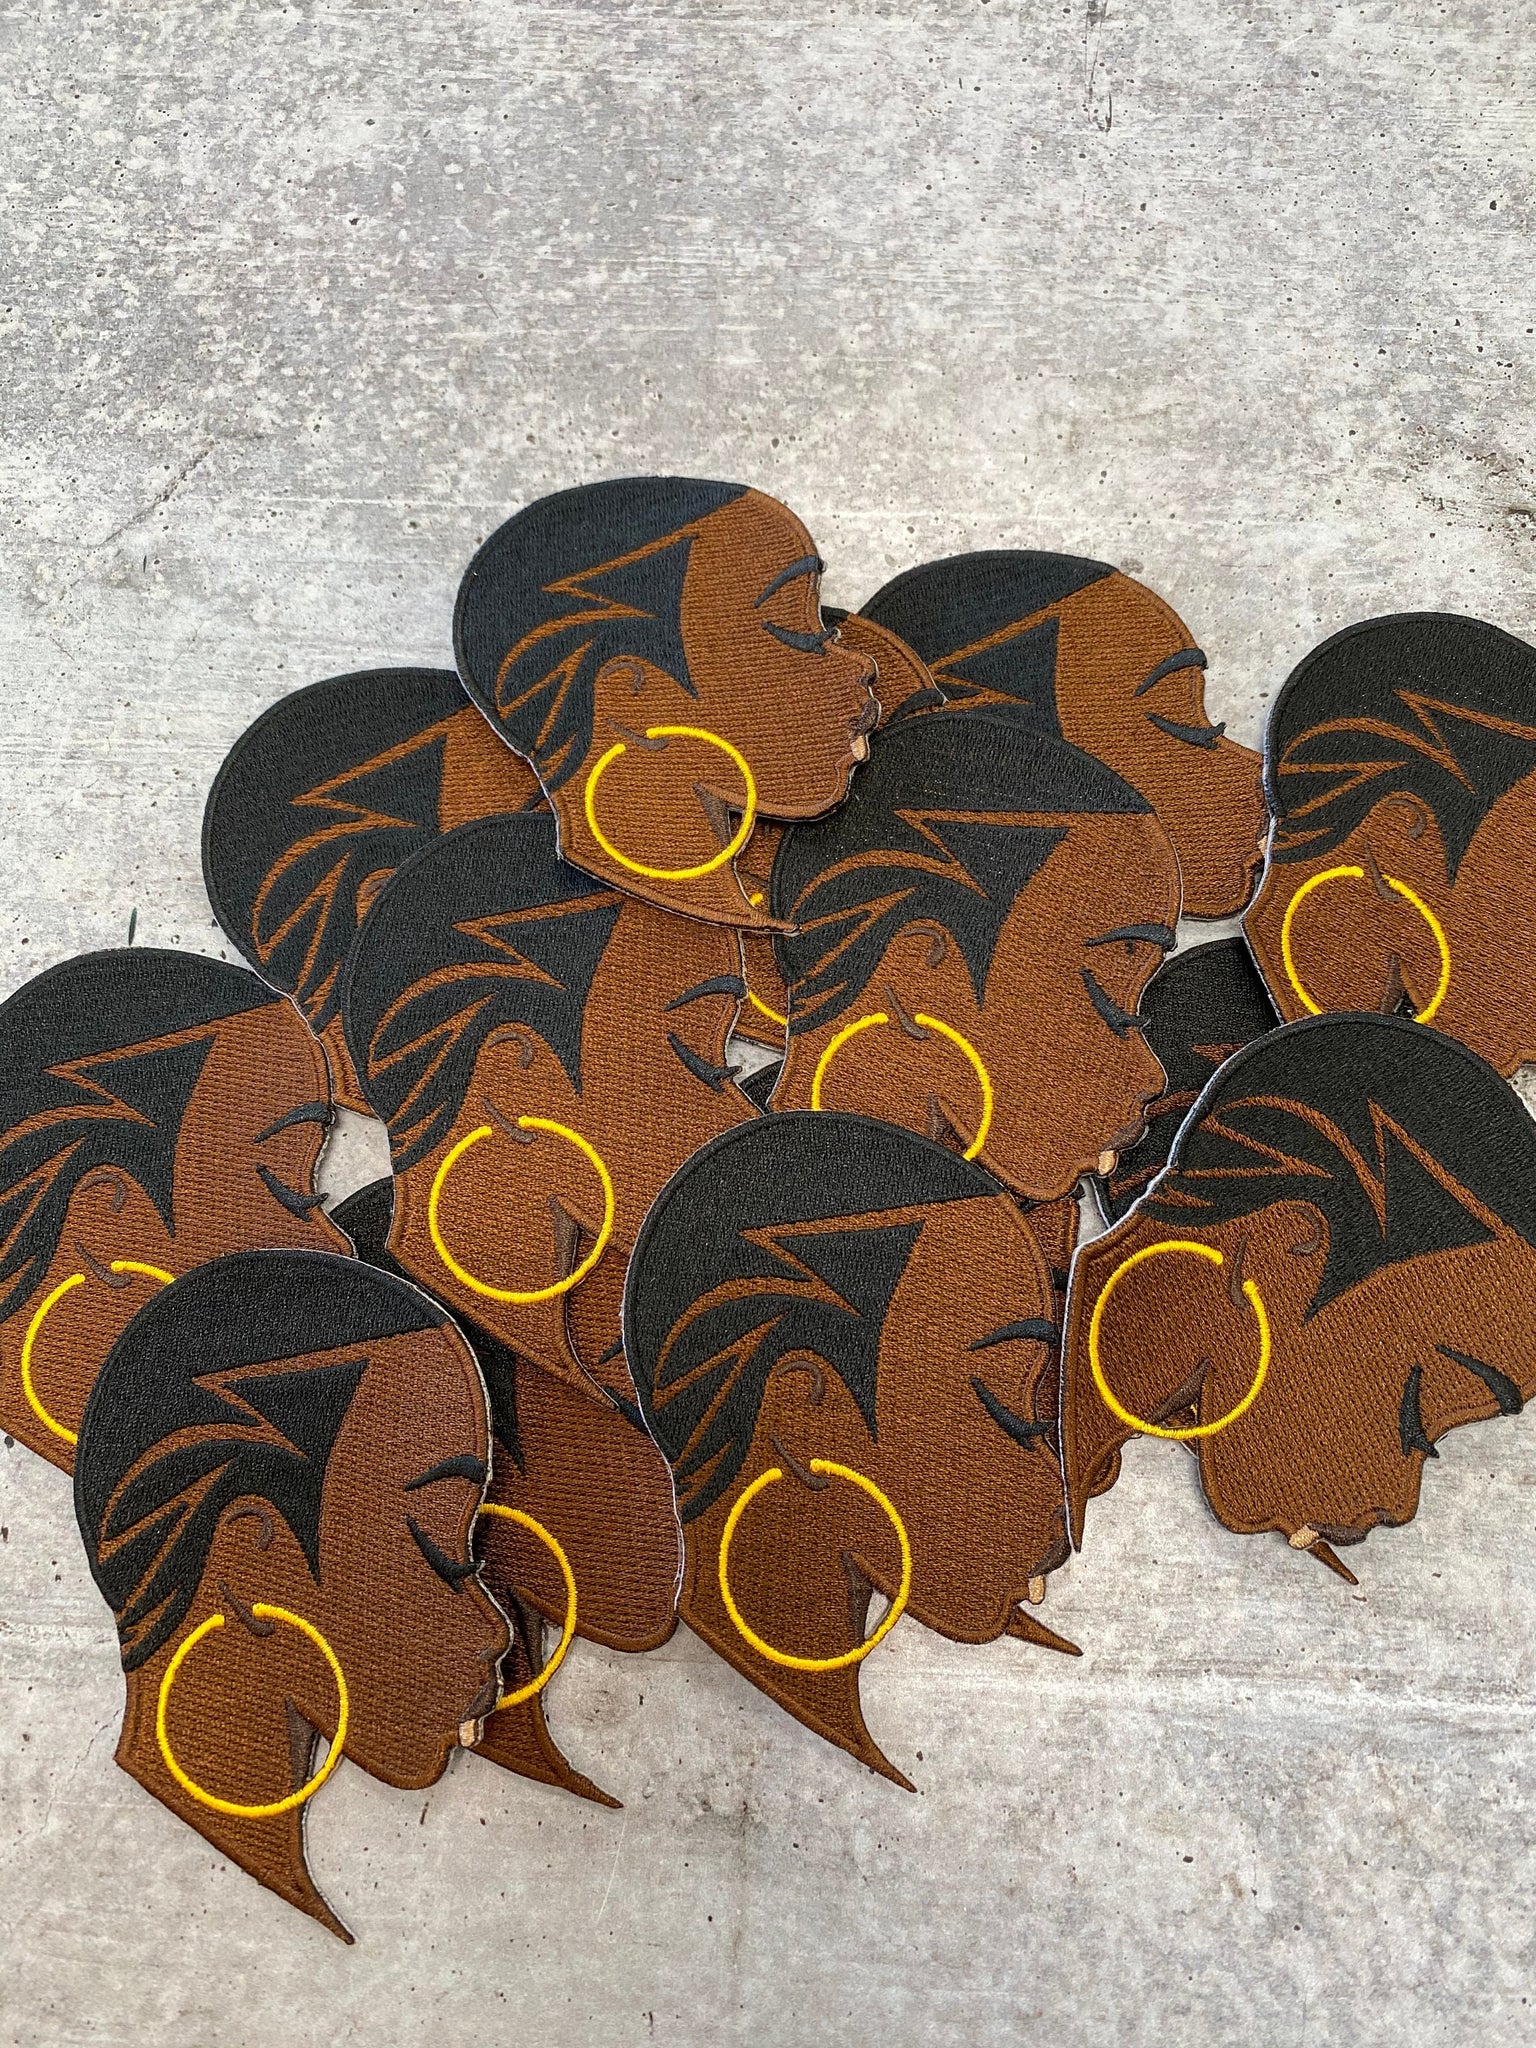 New, "Short N' Sassy Diva (Hair Cut)" Afrocentric-Diva Patch, 3" Iron-on Embroidered Patch, DIY, Craft Supplies, Melanin Magic, Short Hair